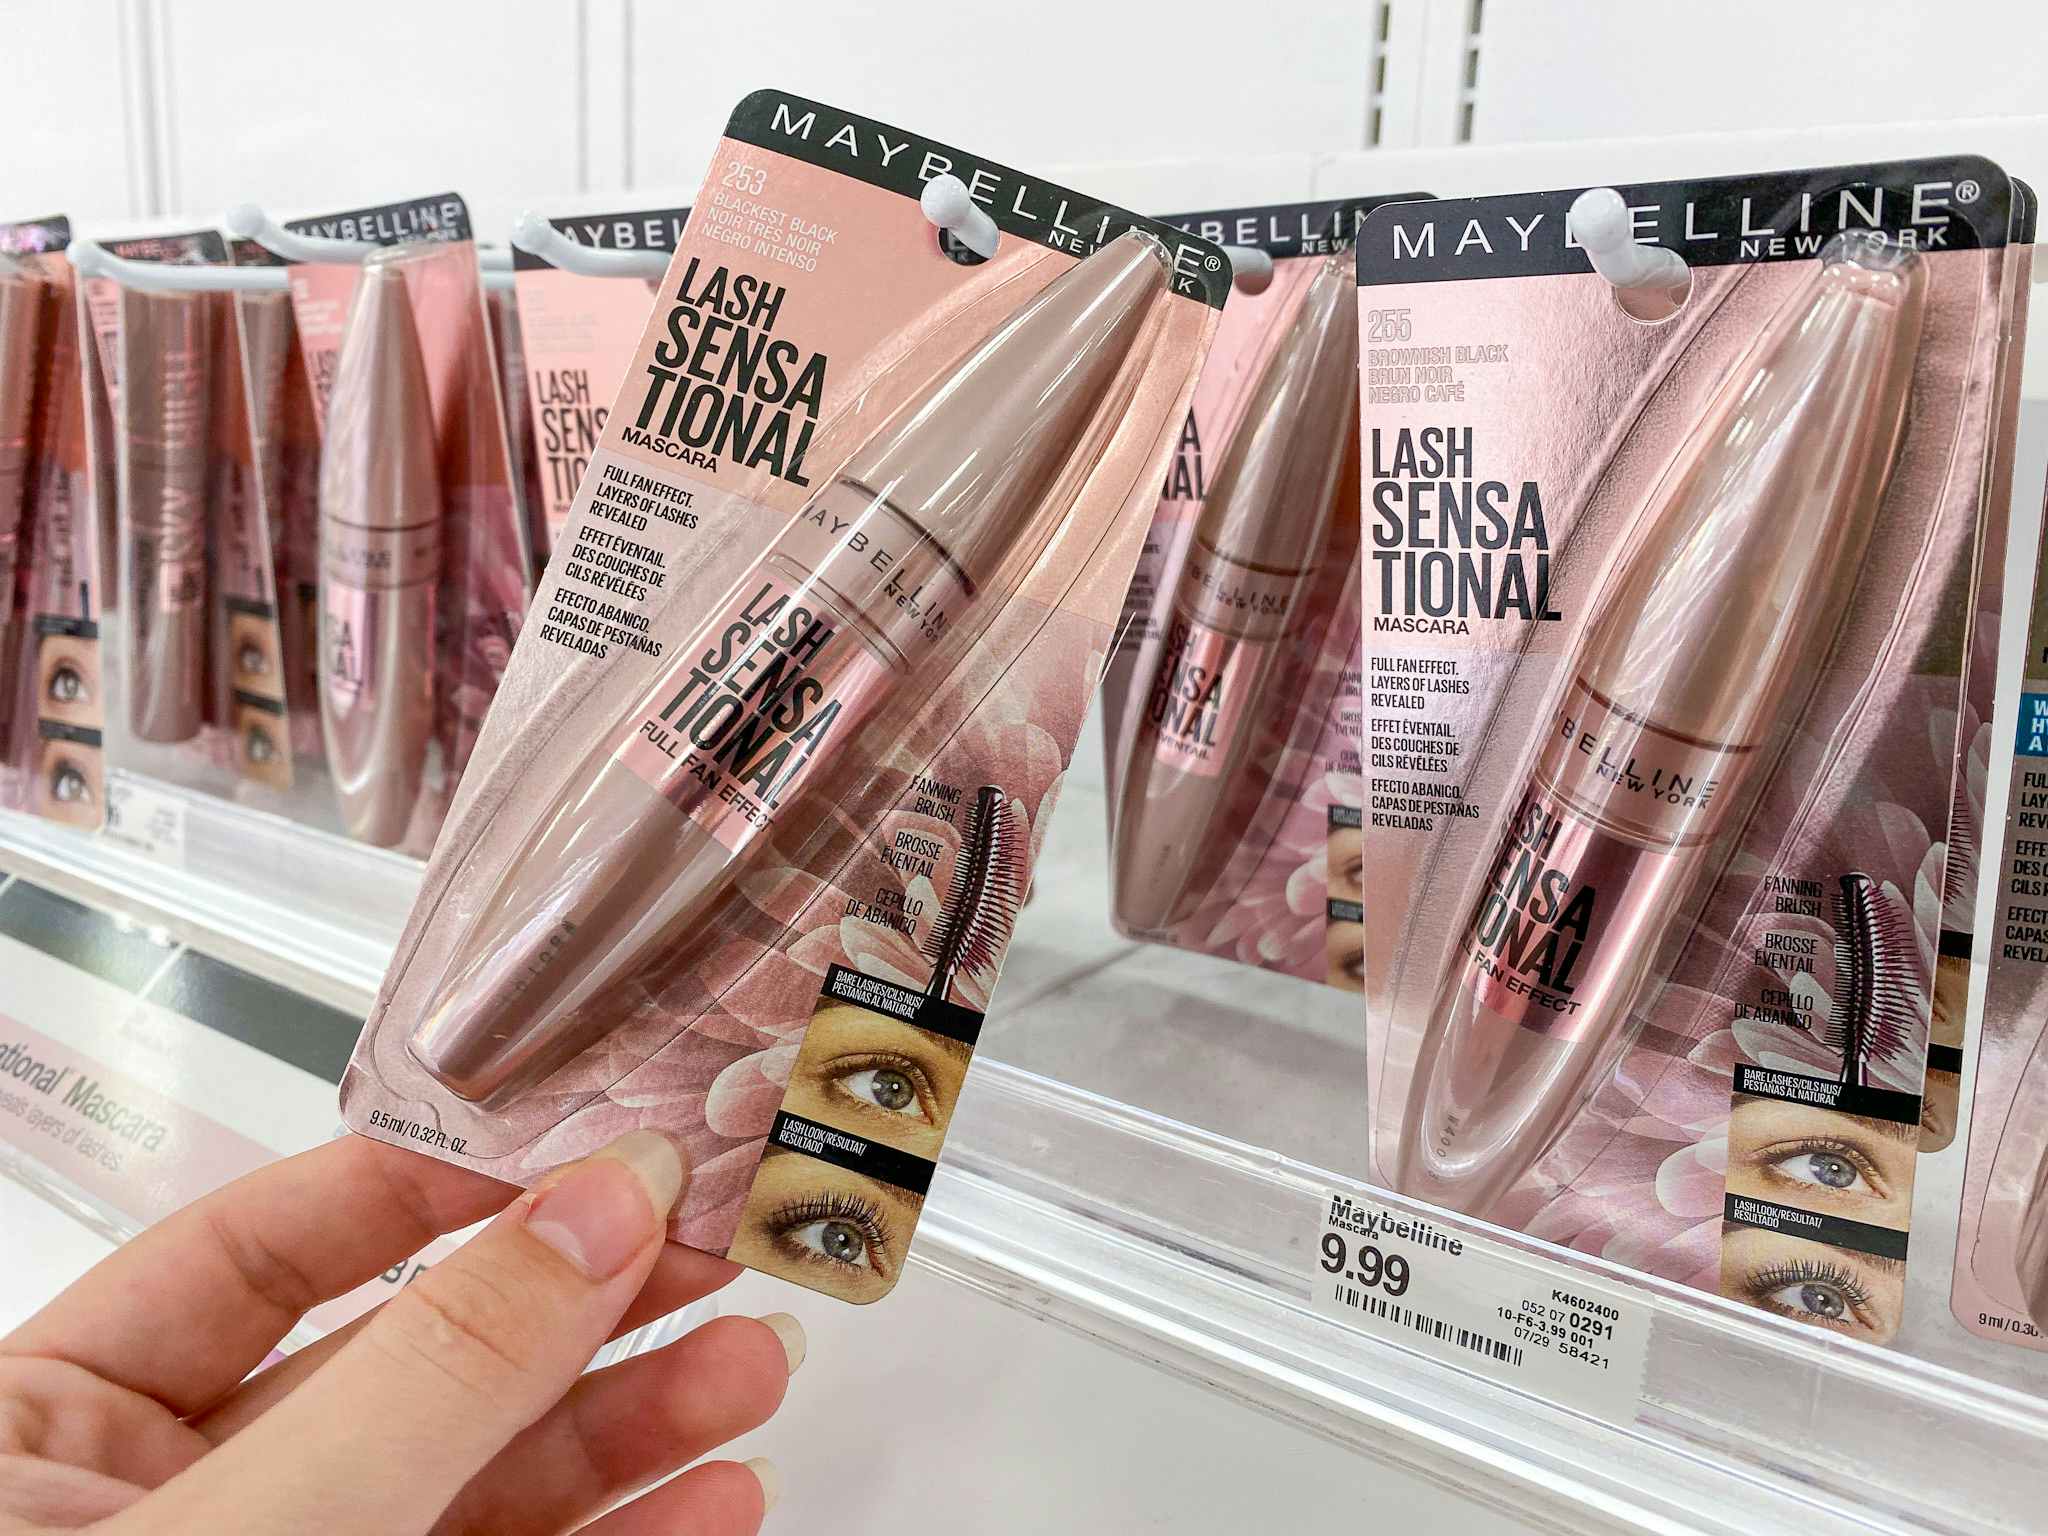 A person's hand reaching to take a Maybelline Lash Sensational Lengthening Mascara from the display in the beauty aisle at Target.